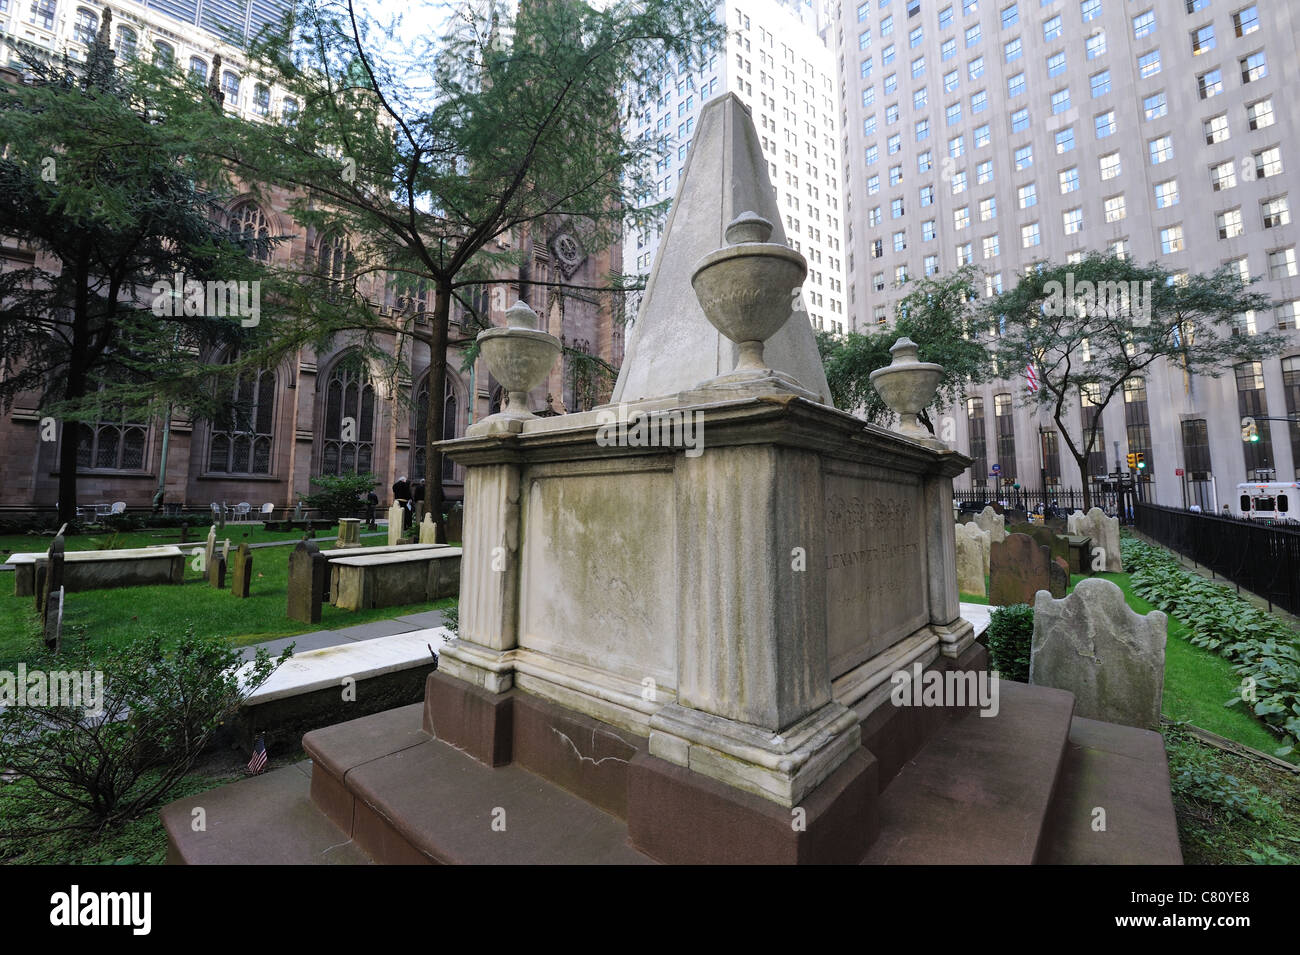 The grave of Alexander Hamilton in Trinity churchyard. The church, which was established in 1697, is in Lower Manhattan. Stock Photo